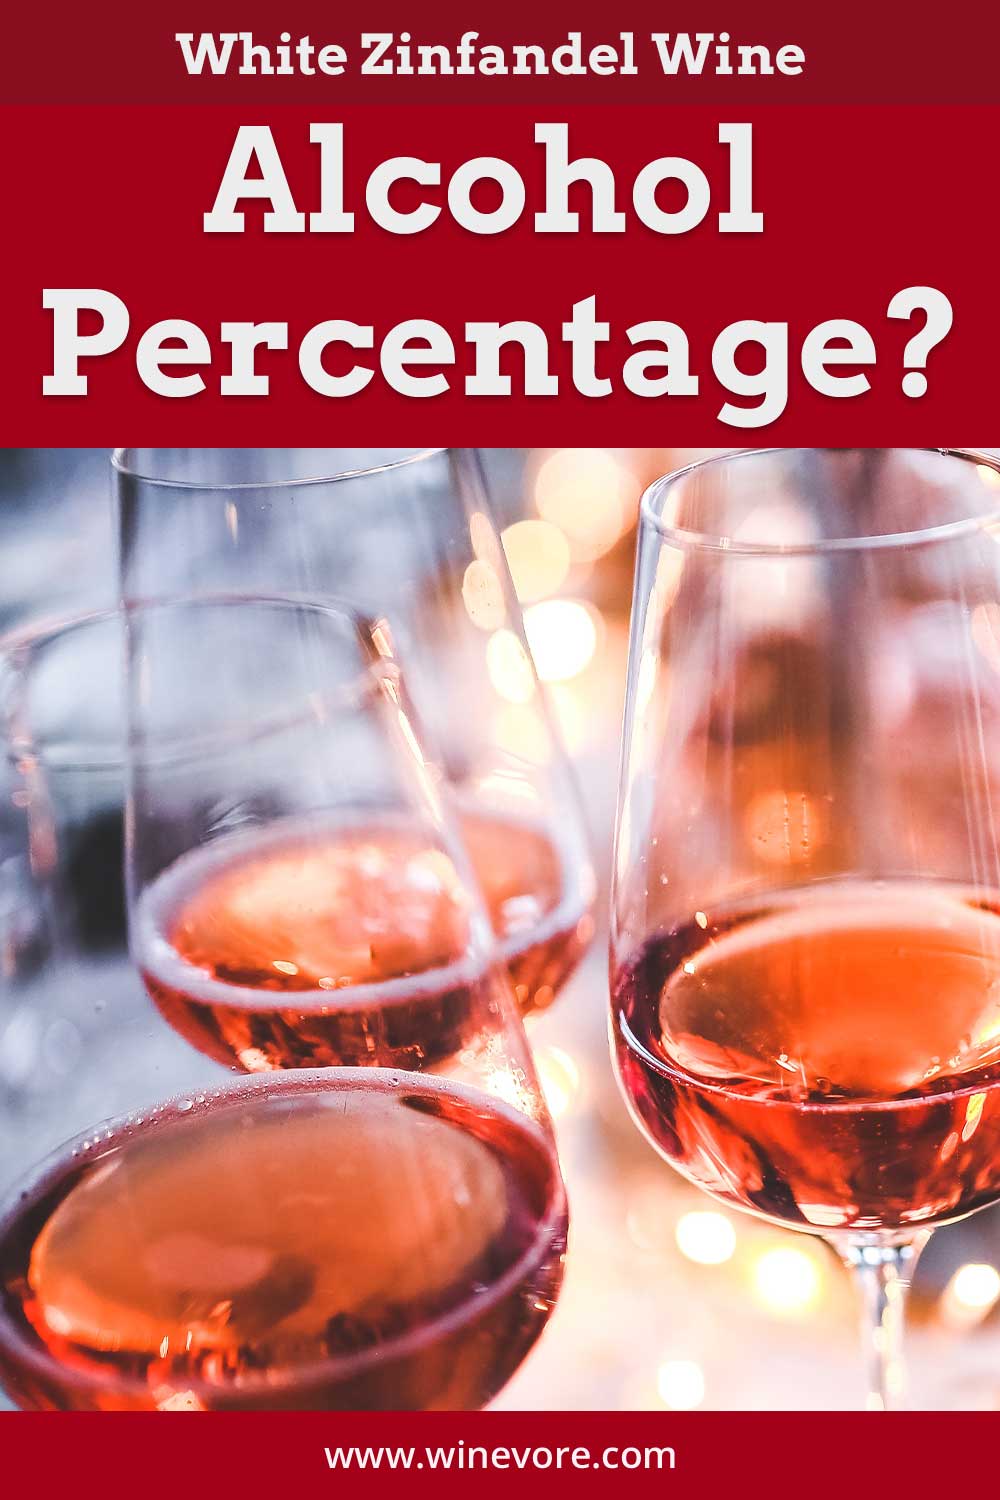 Three wine glasses of white zinfandel - what is its Alcohol Percentage?